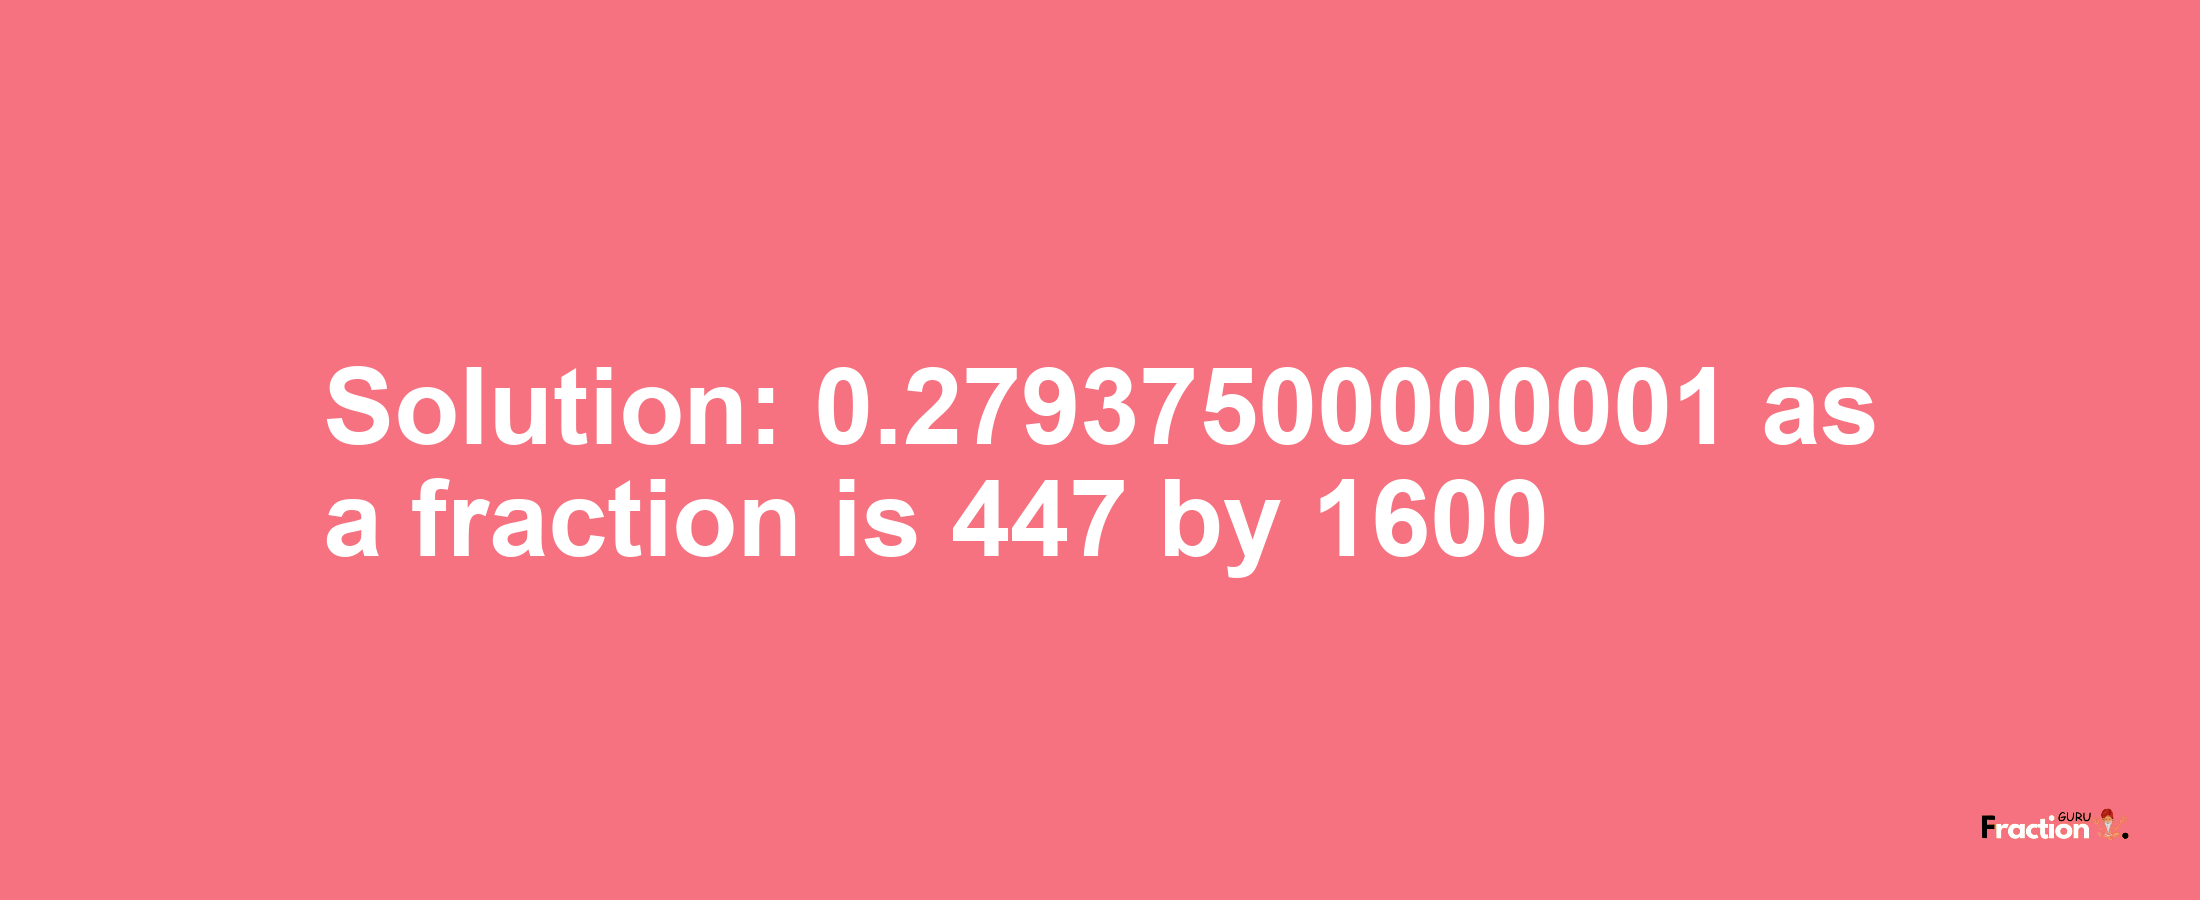 Solution:0.27937500000001 as a fraction is 447/1600